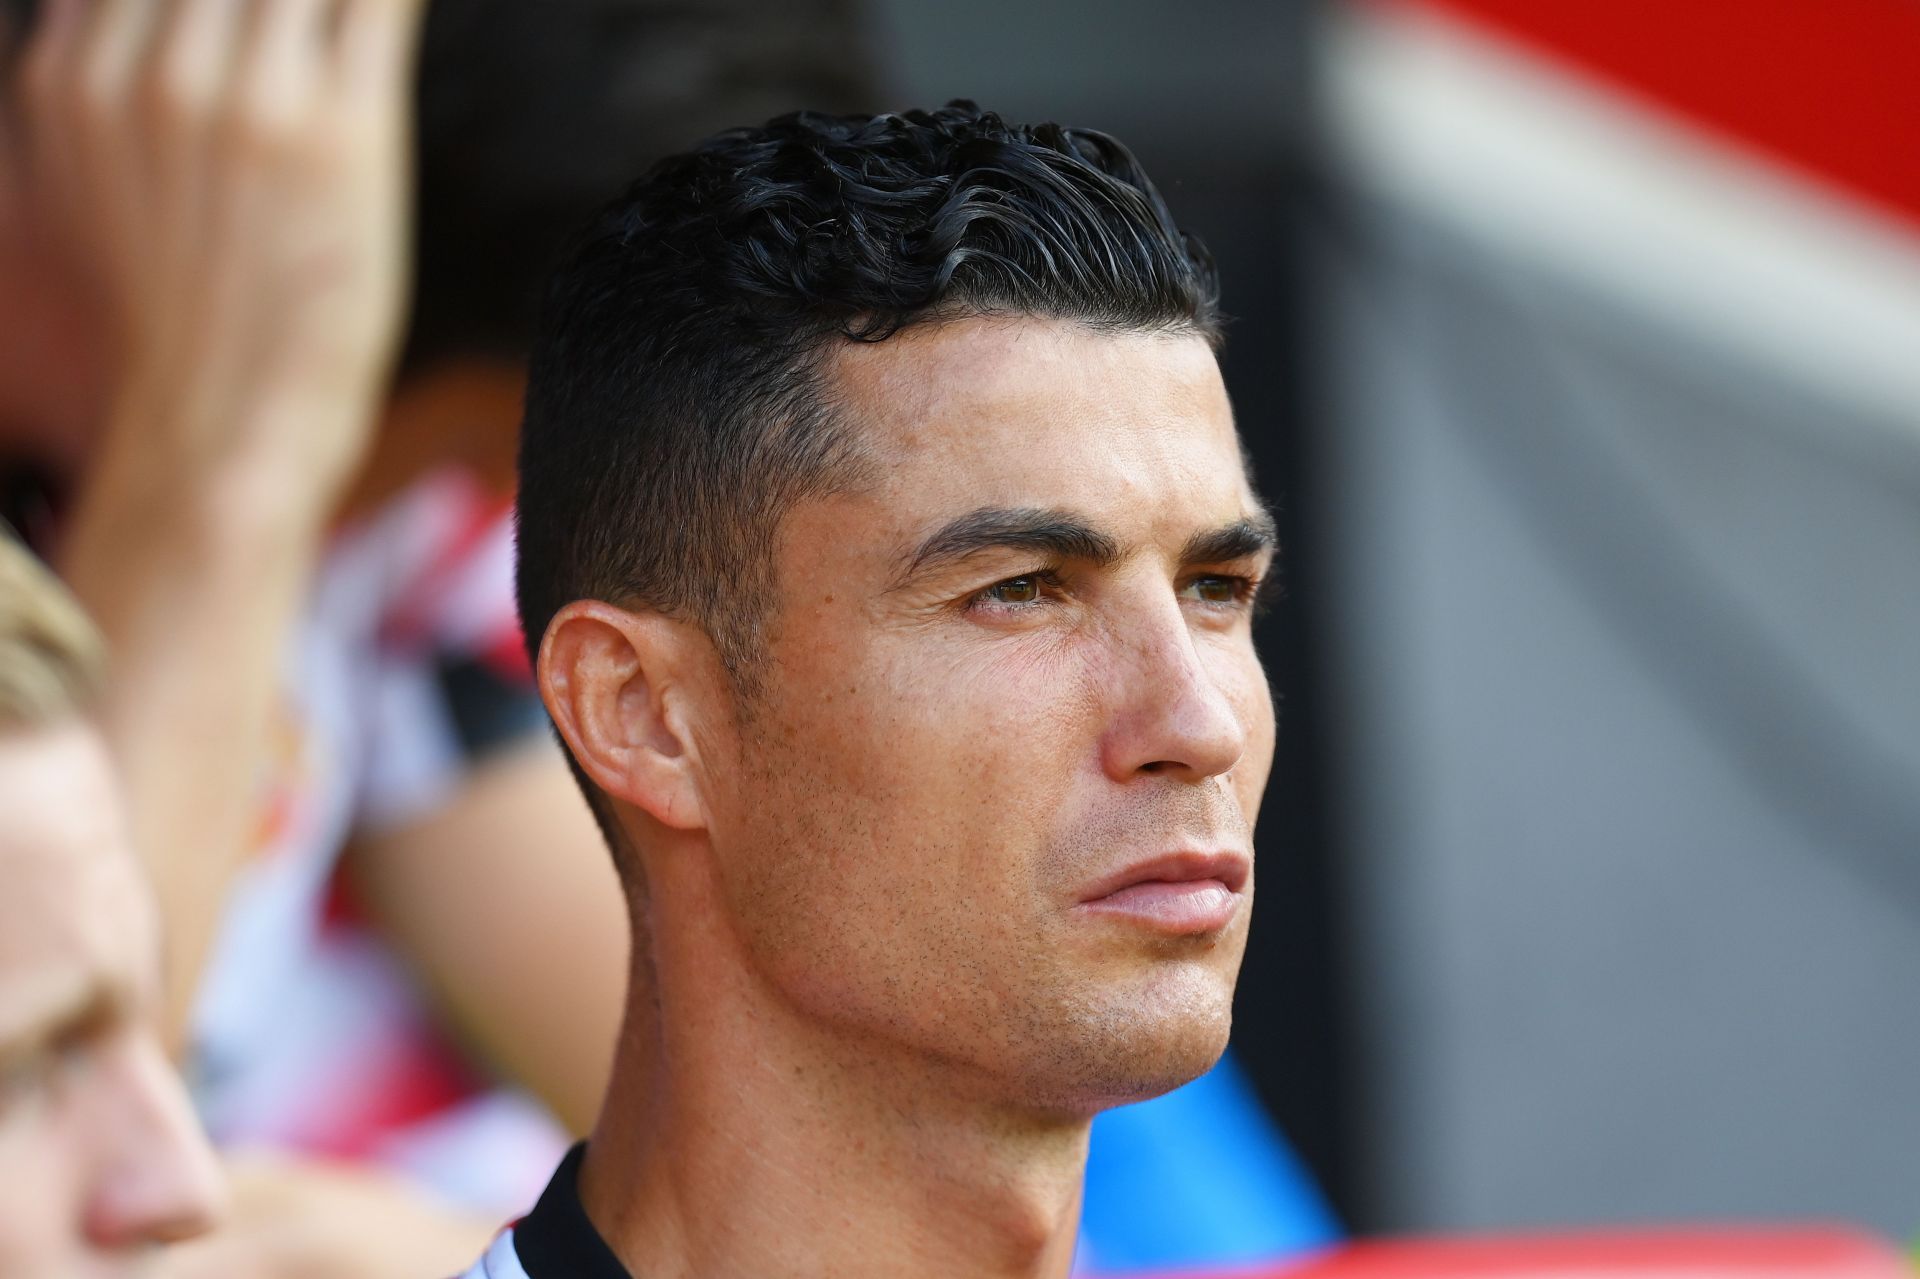 Cristiano Ronaldo has endured a frustrating time this summer